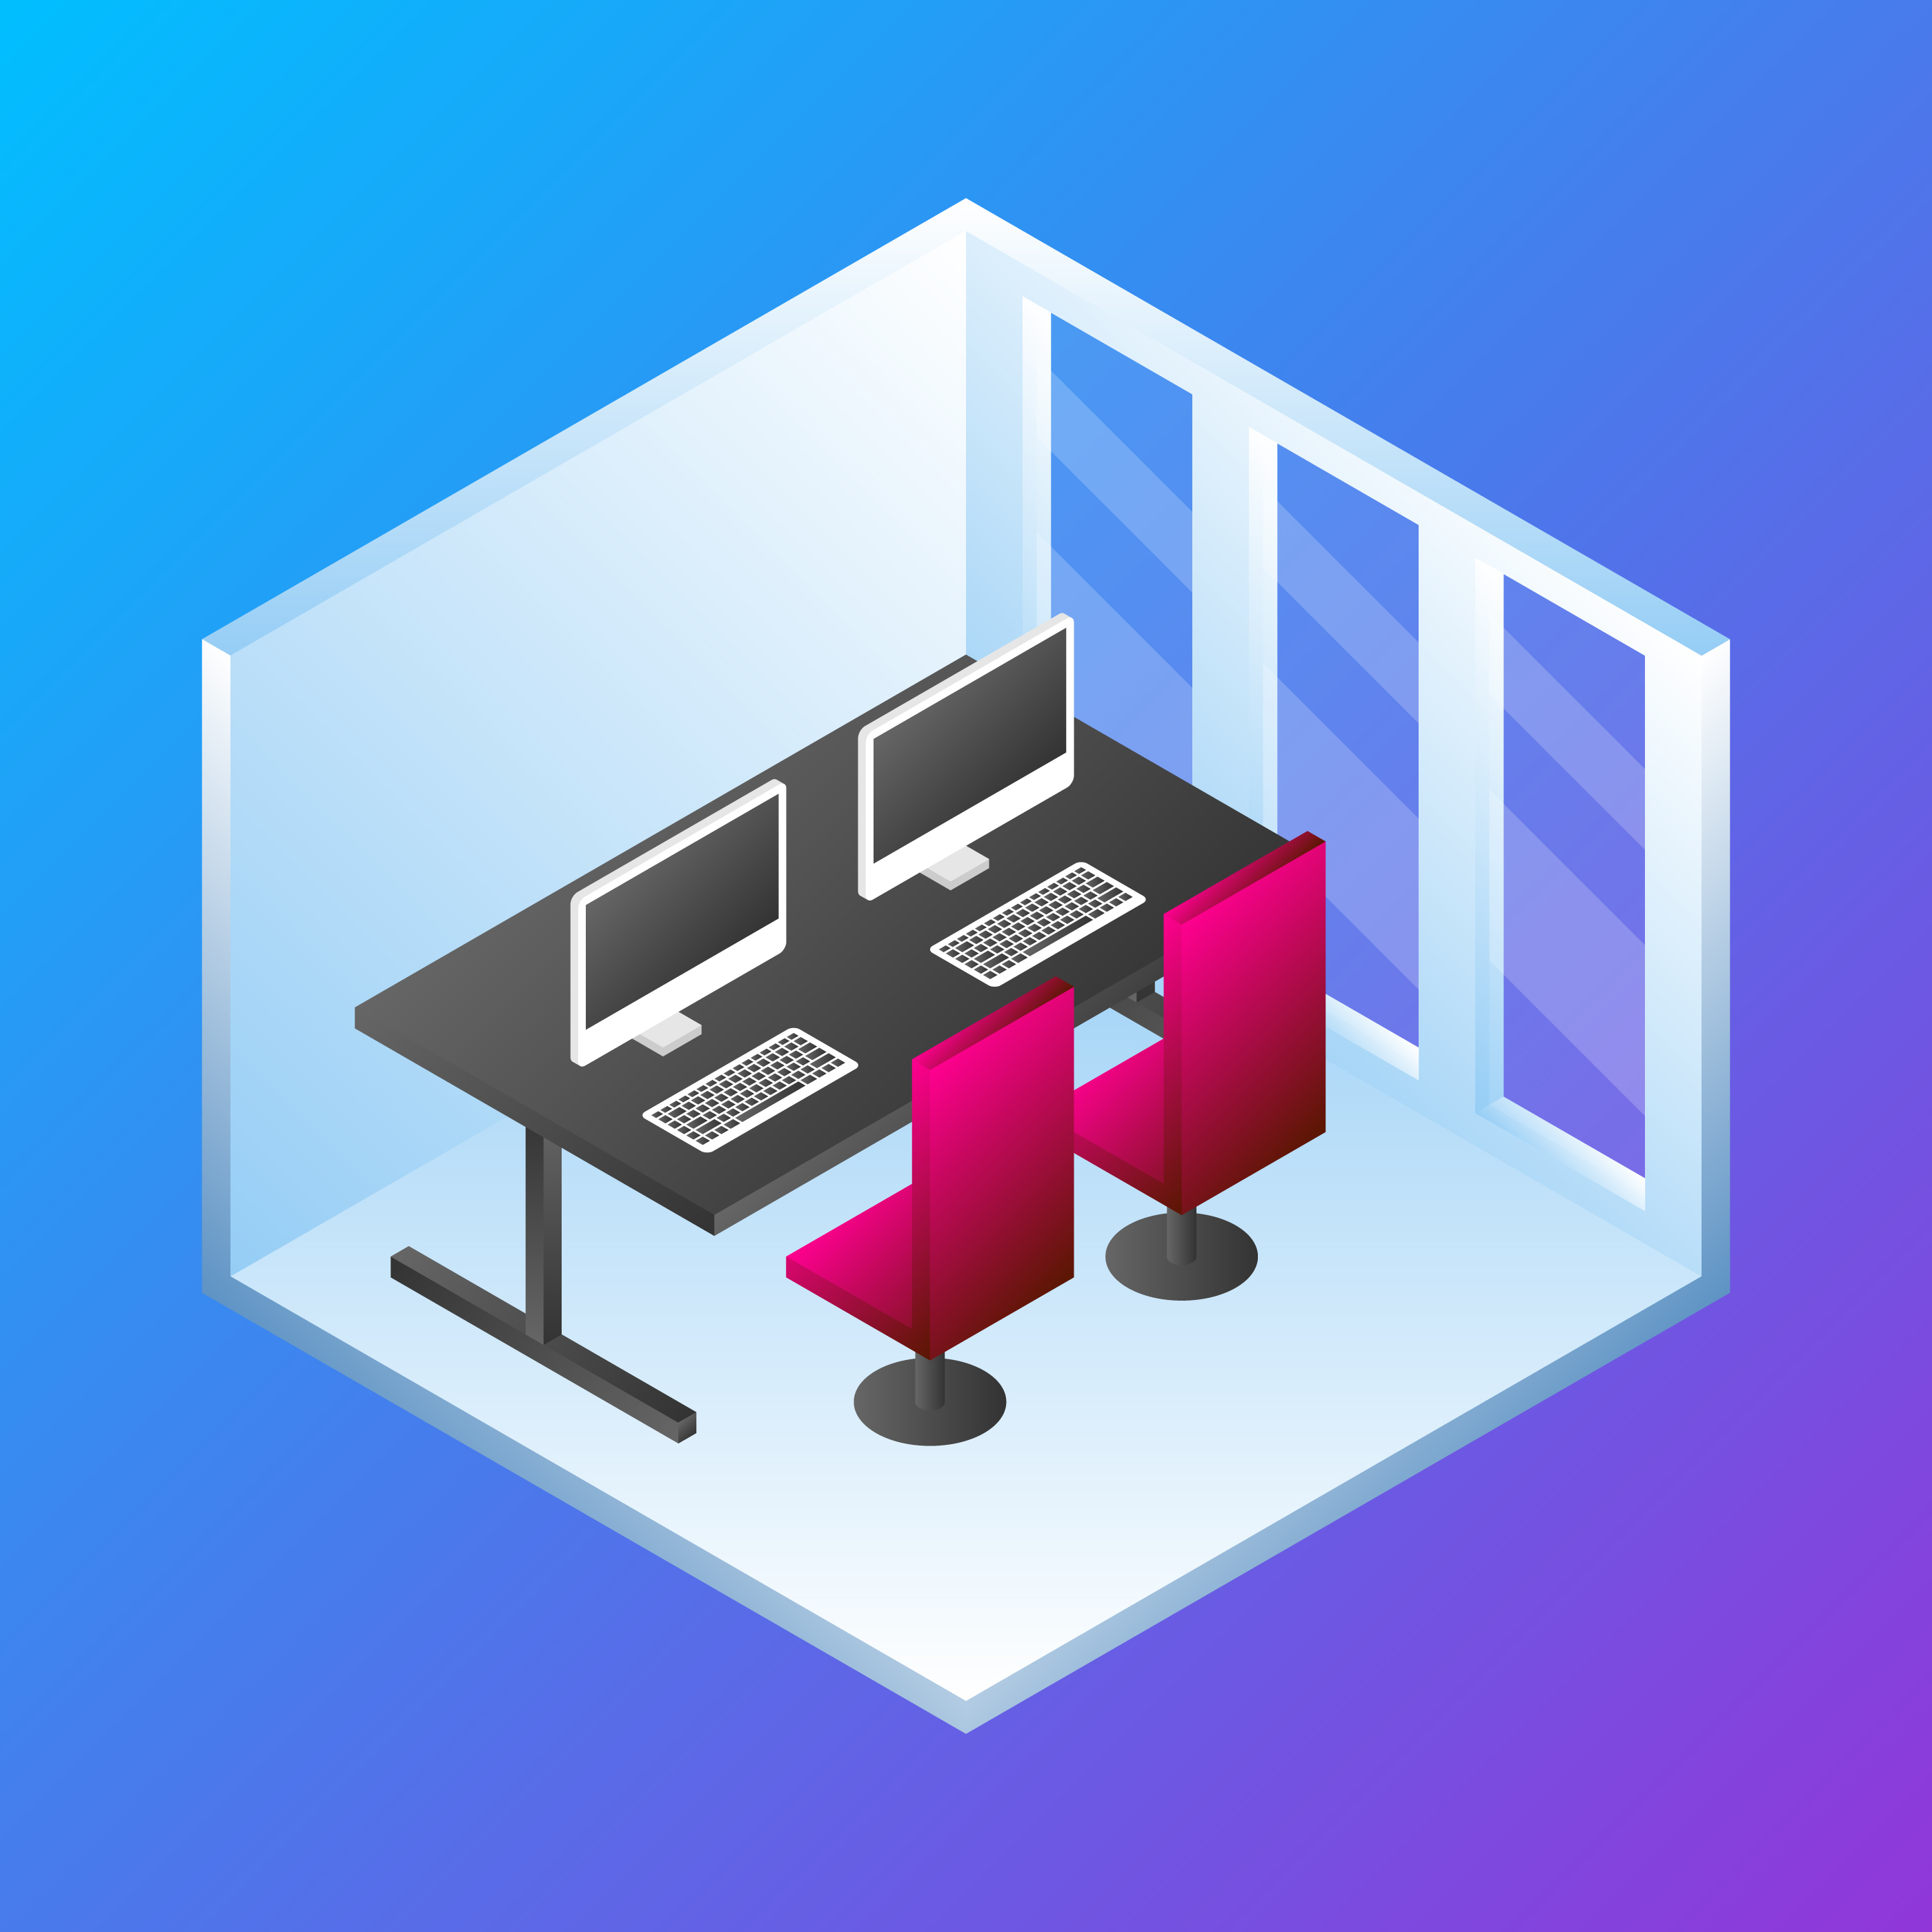 Download Home Office Concept Isometric Vector Illustration ...